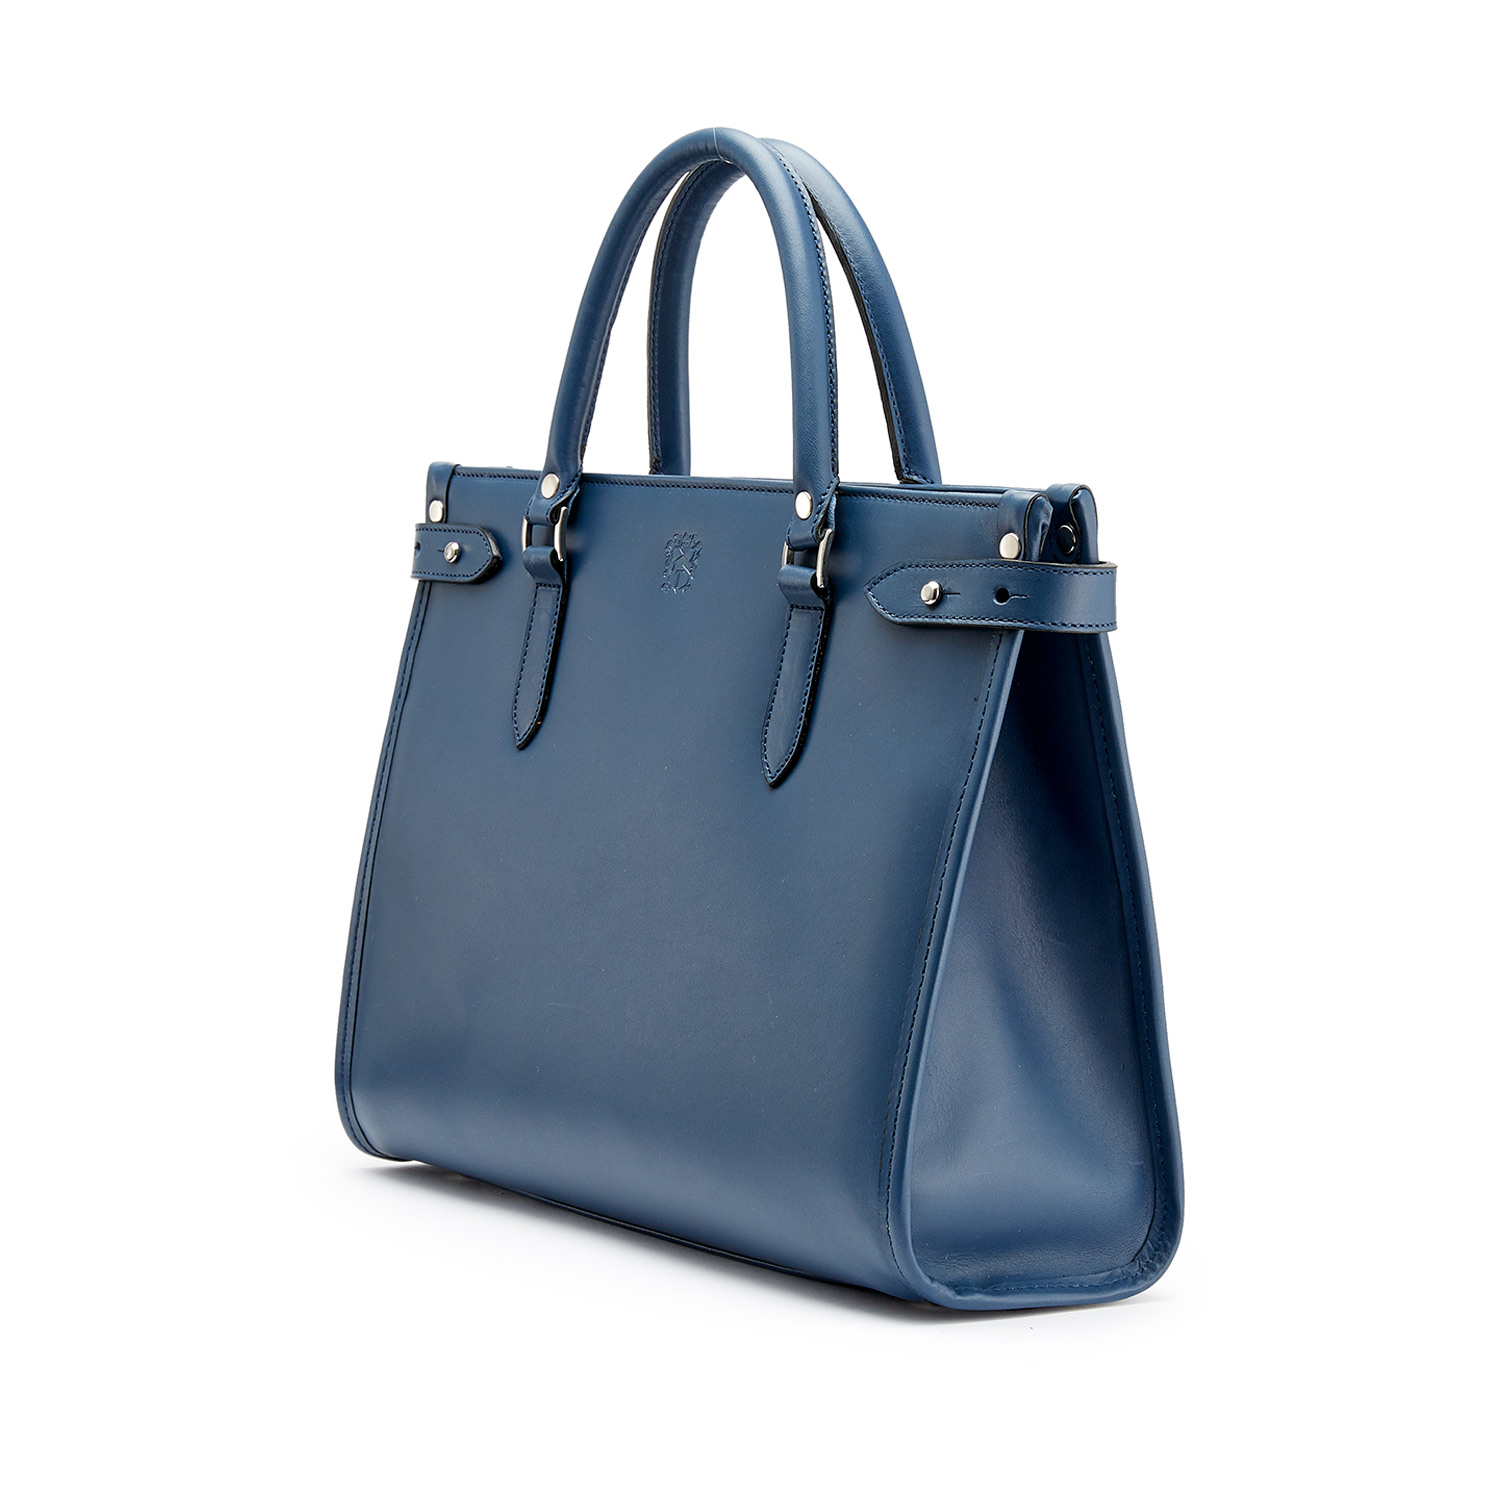 Kimbolton Luxury Leather Tote Work Bag Made in England | Tusting